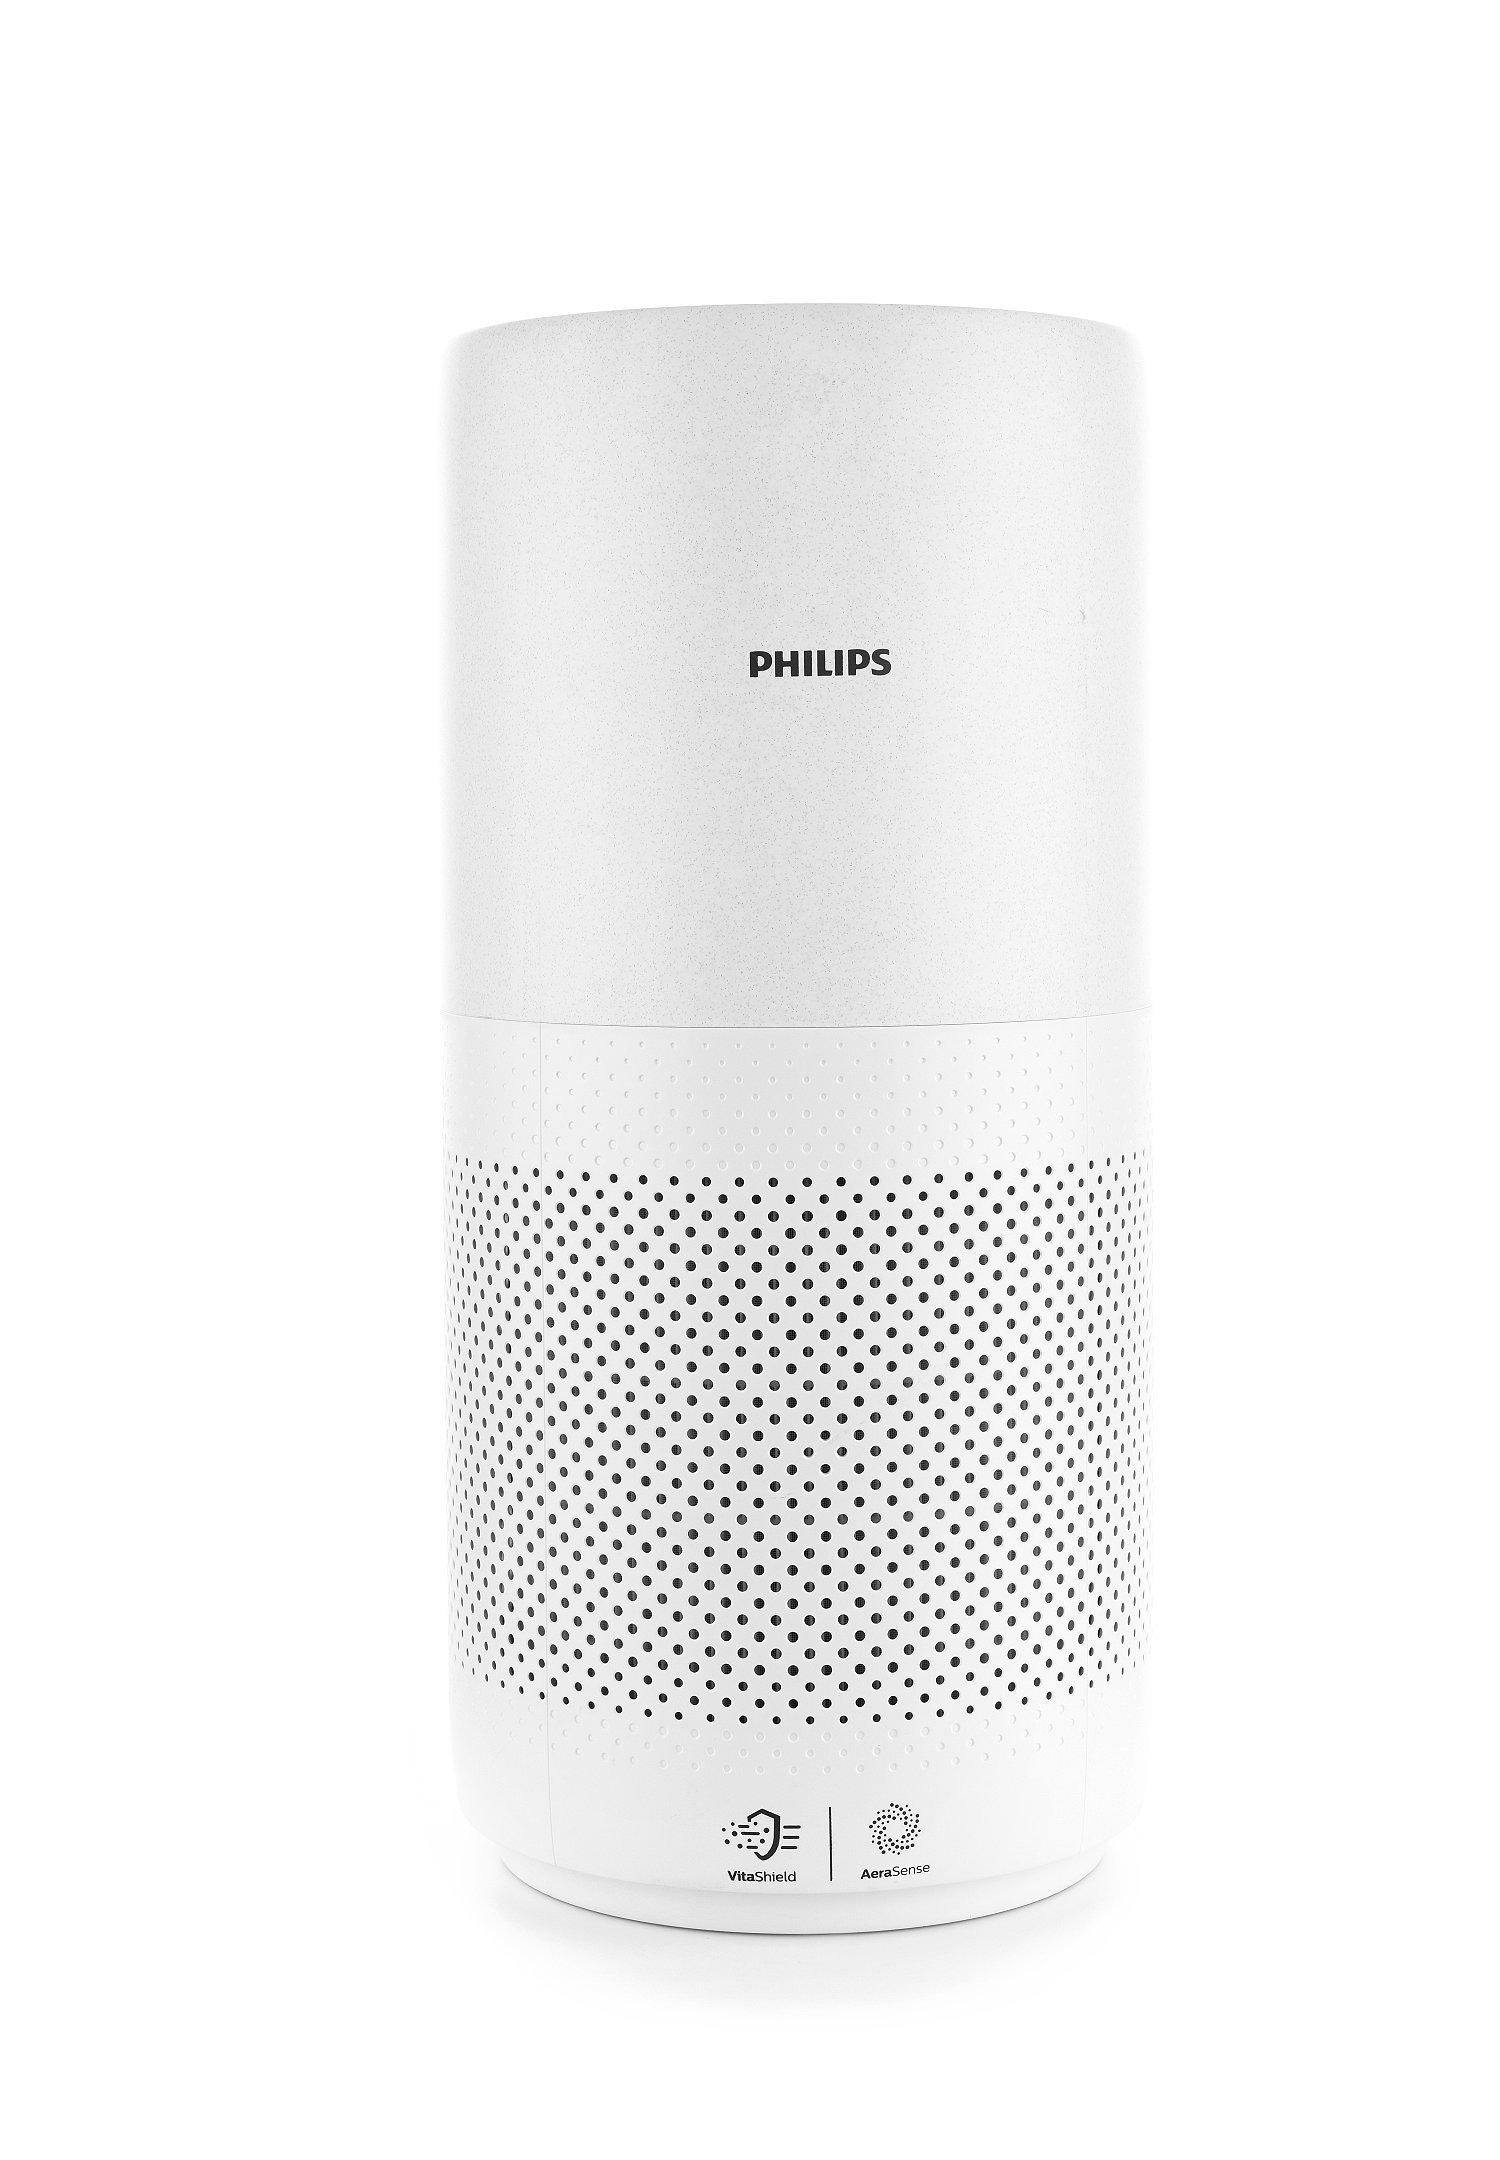 Buy Philips Air Purifier Series 2000, Removes 99.97% , Coverage 85m2, White/Gray in Saudi Arabia